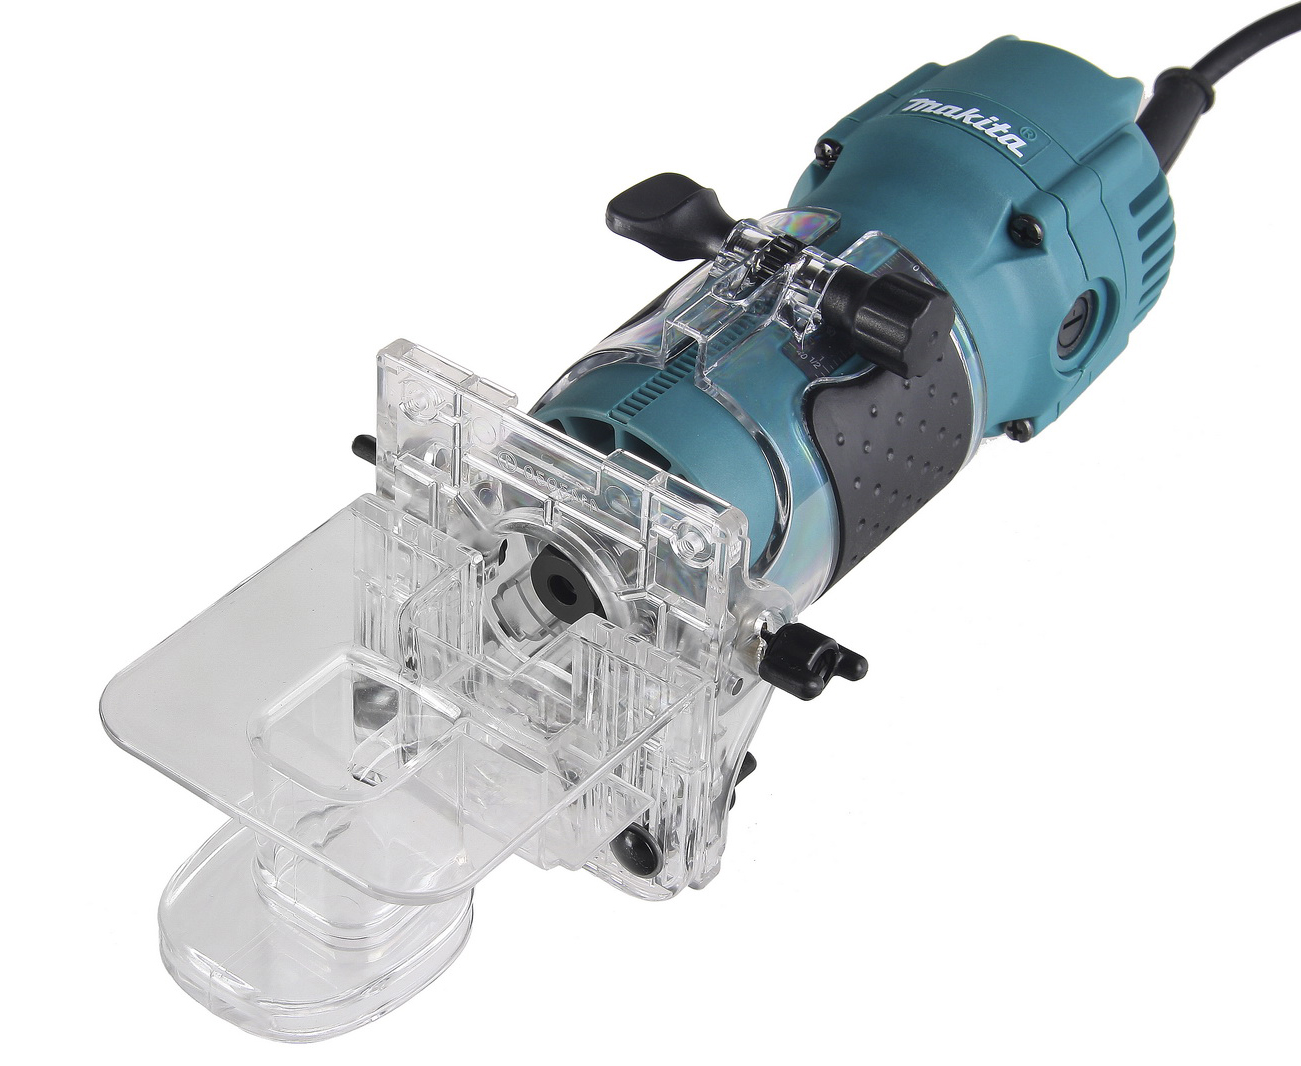   Makita - Makita - Makita<br>: 530,<br>. : 35000,<br>: 35000,<br> : -,<br>: 6,<br> : ,<br> : 1.5,<br> : ,<br> : <br>